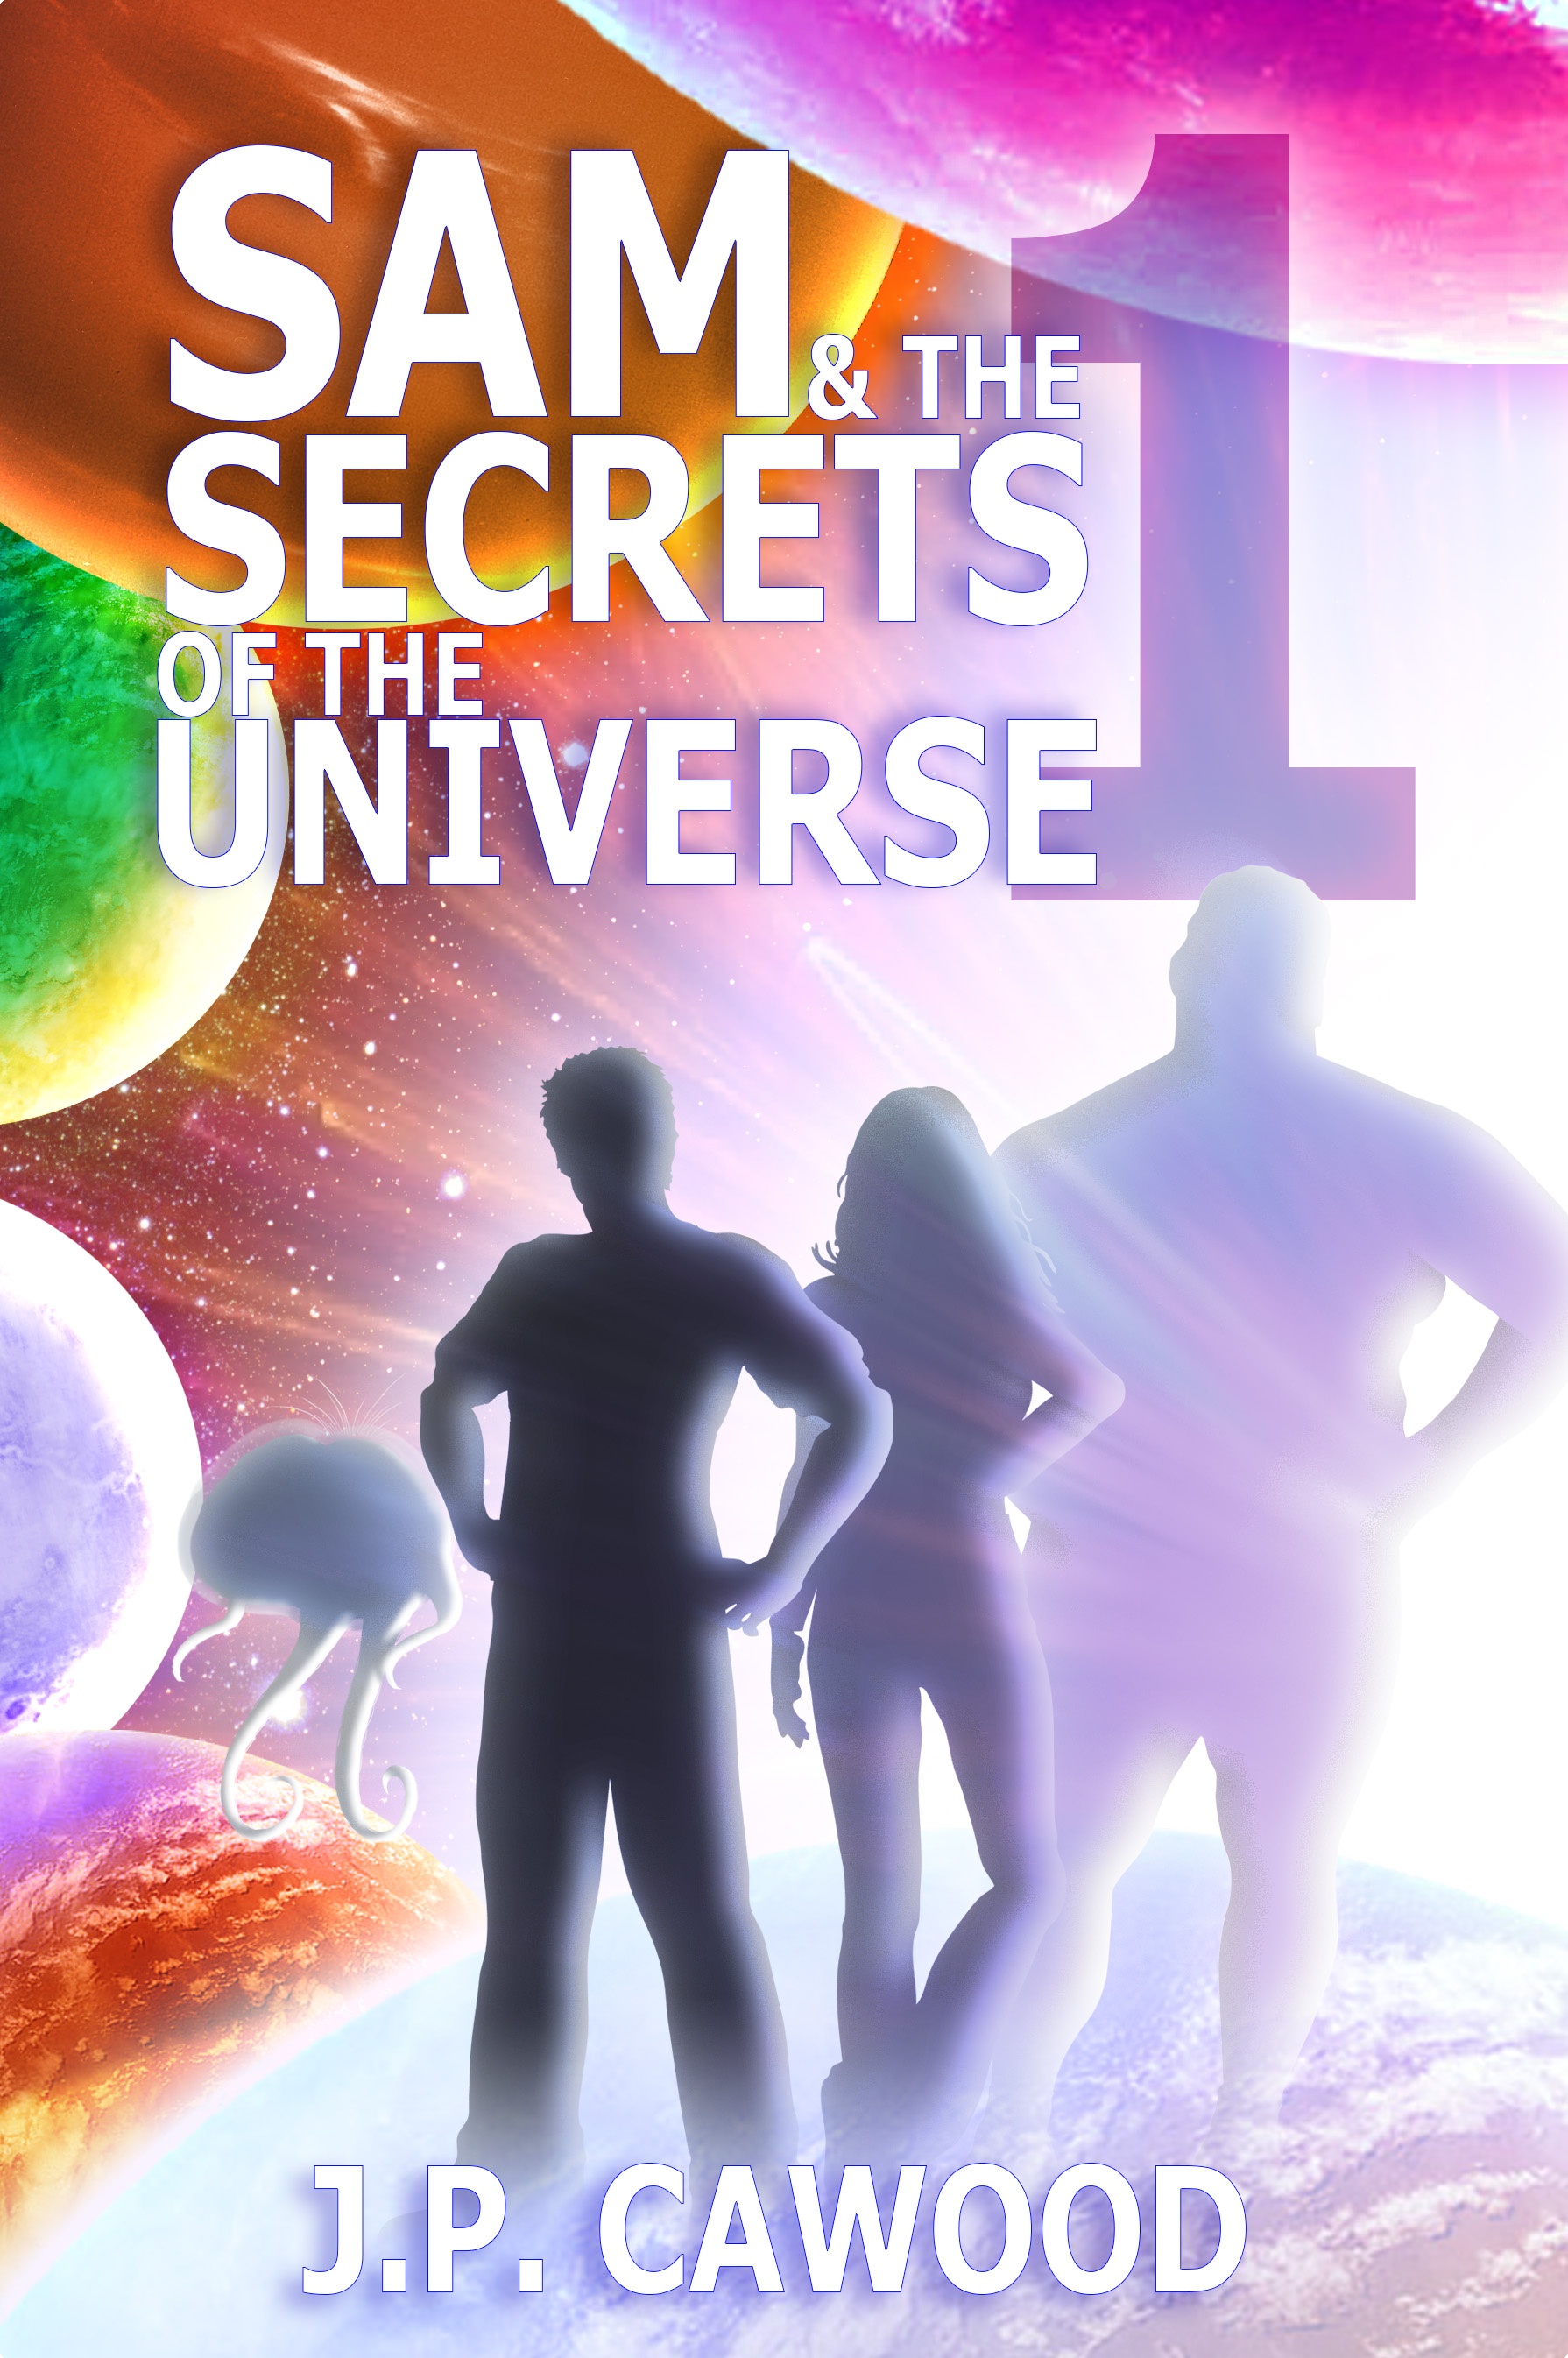 Same and the secrets of the Universe